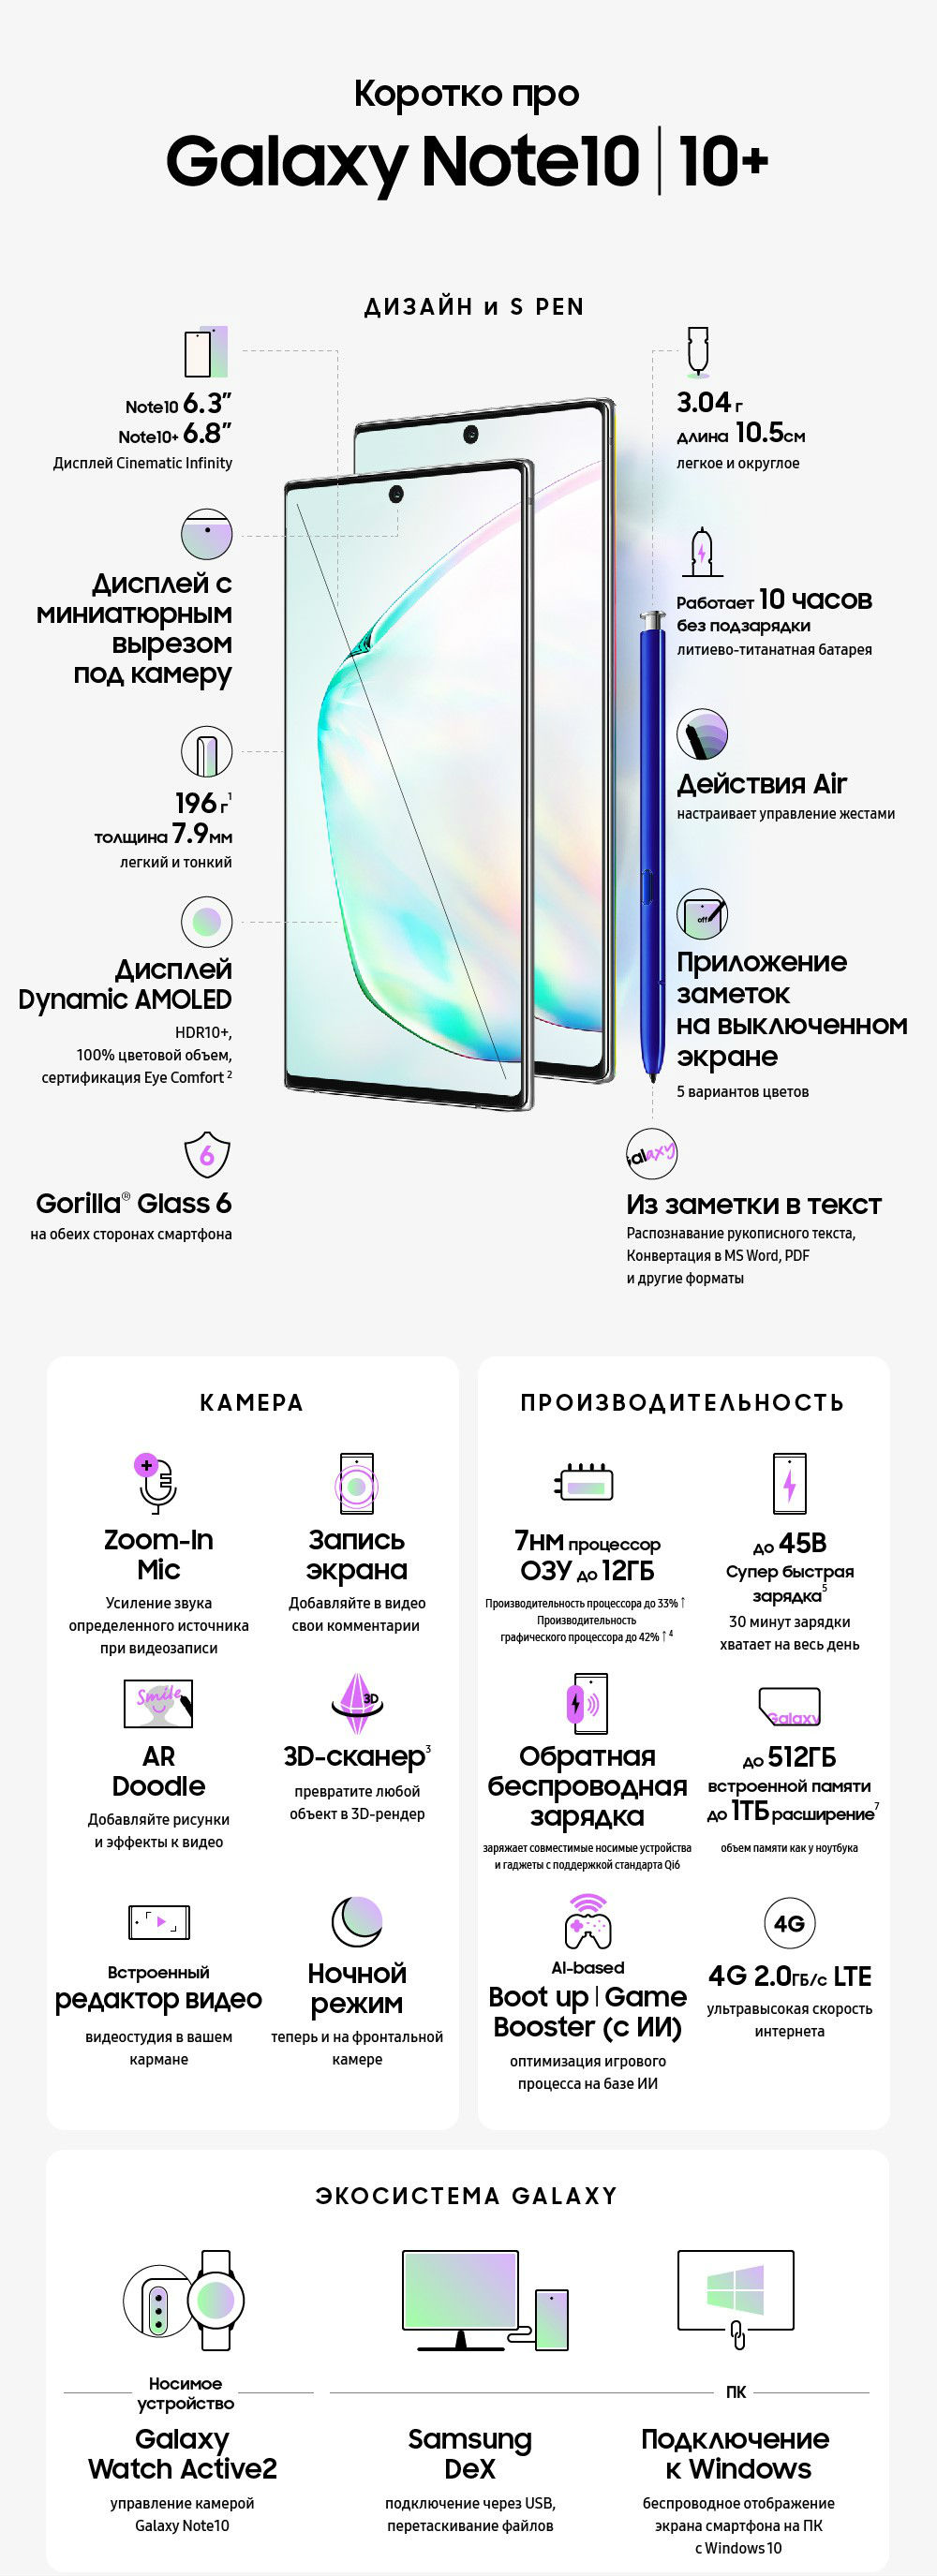 Official sales of a new line of Samsung Galaxy Note10 phablets start in Russia